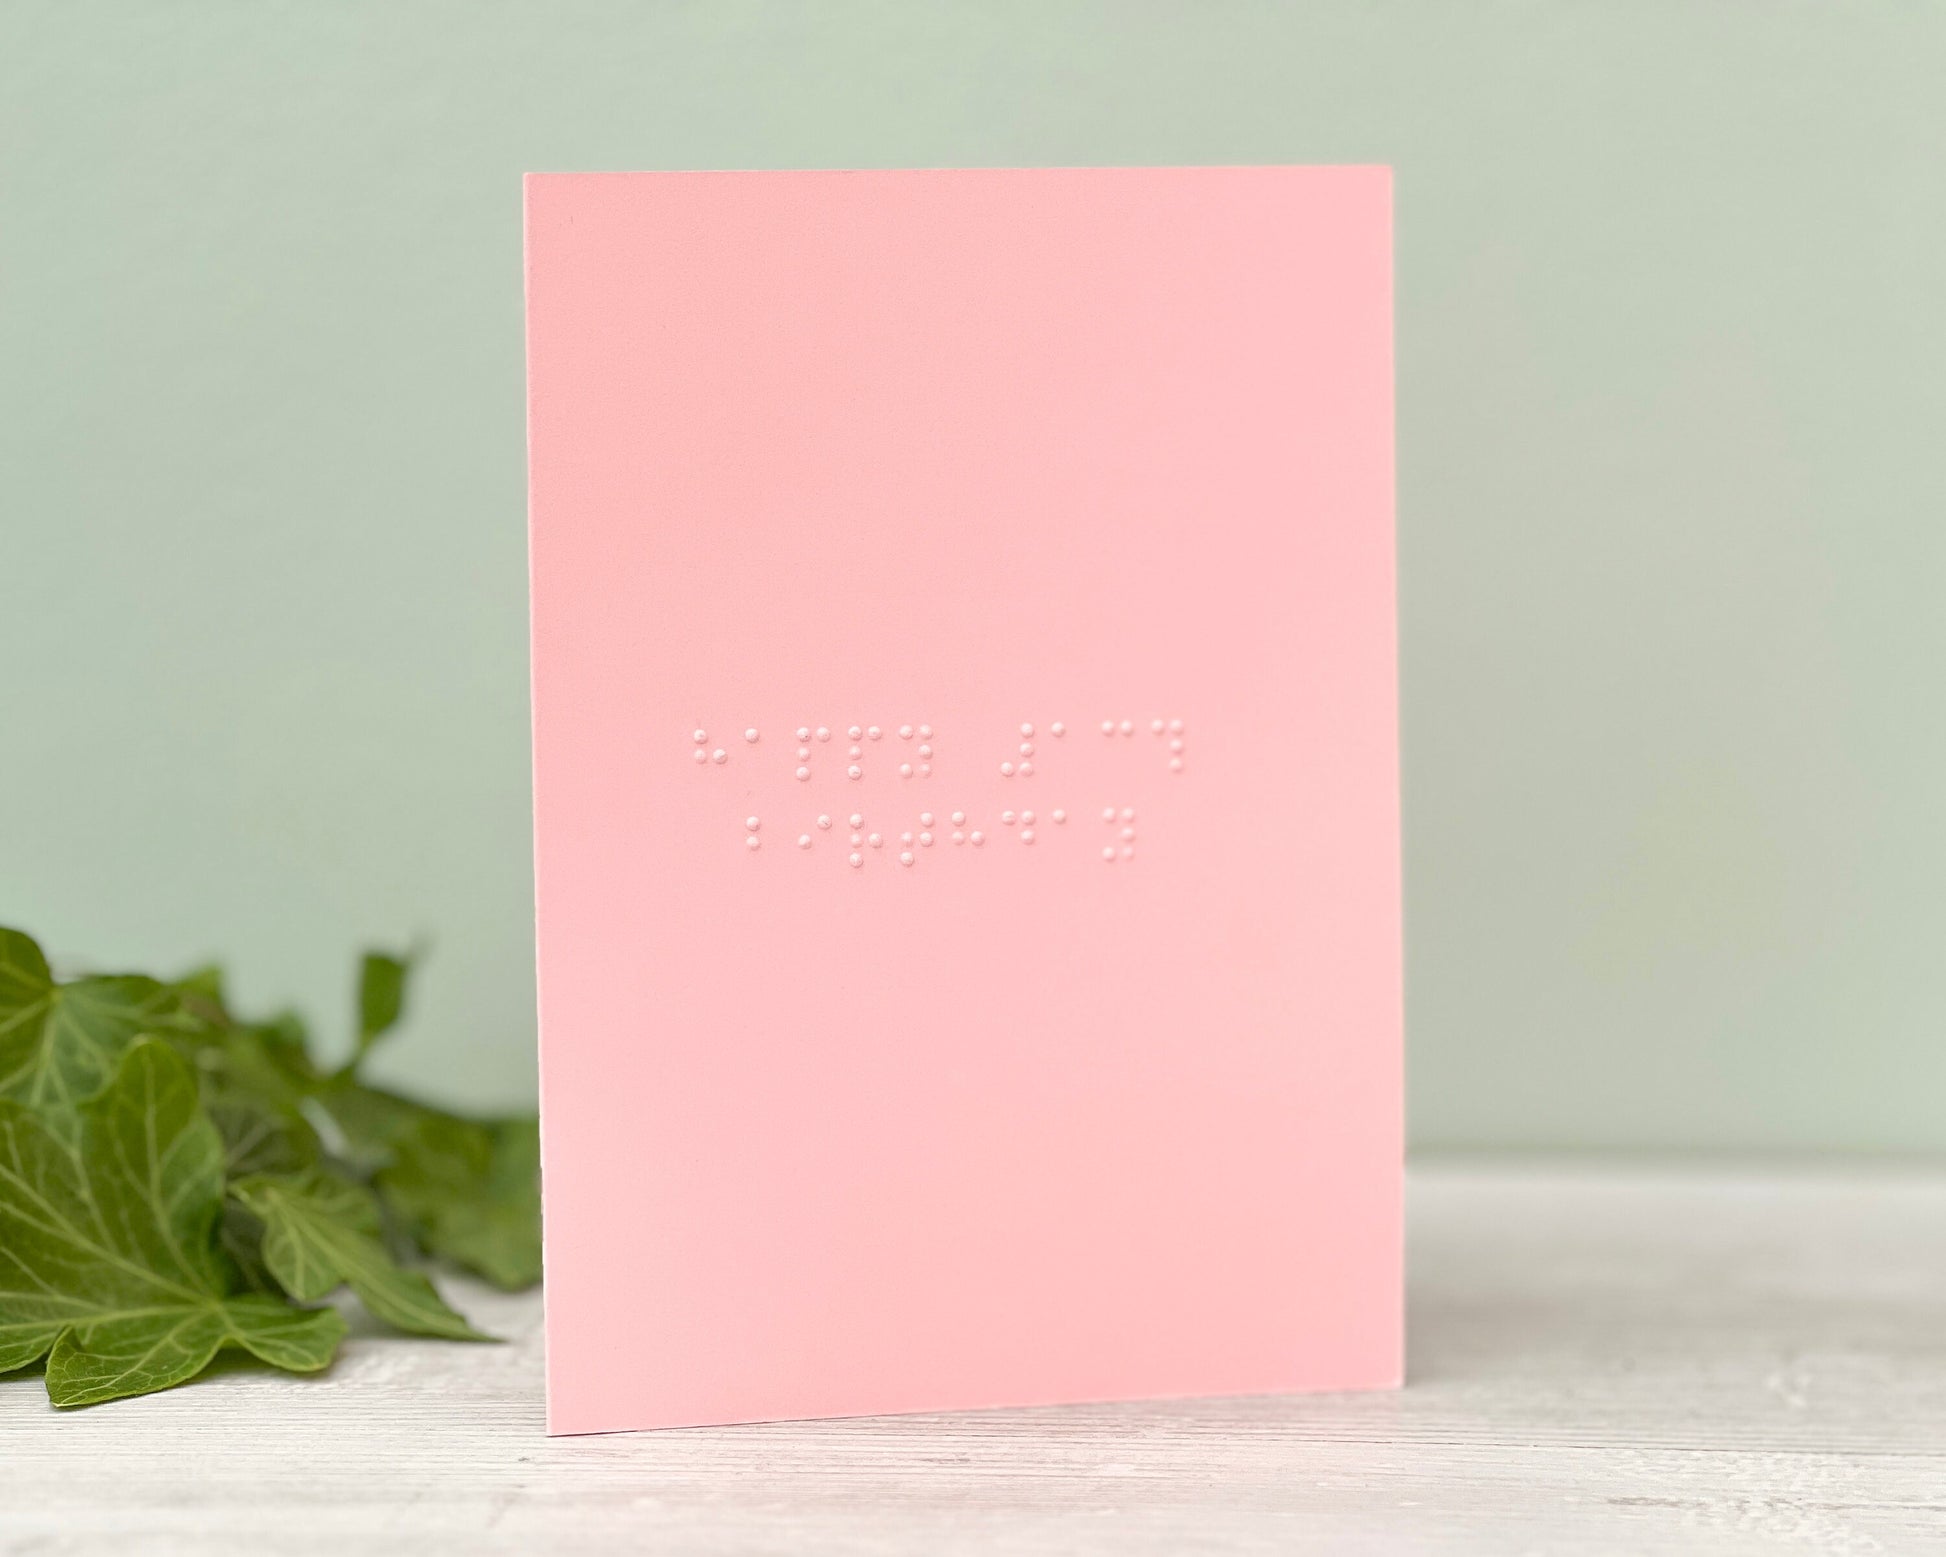 A pastel pink portrait greetings card with on your 13th birthday written in lower case braille. There is some foliage to the left of the photo.